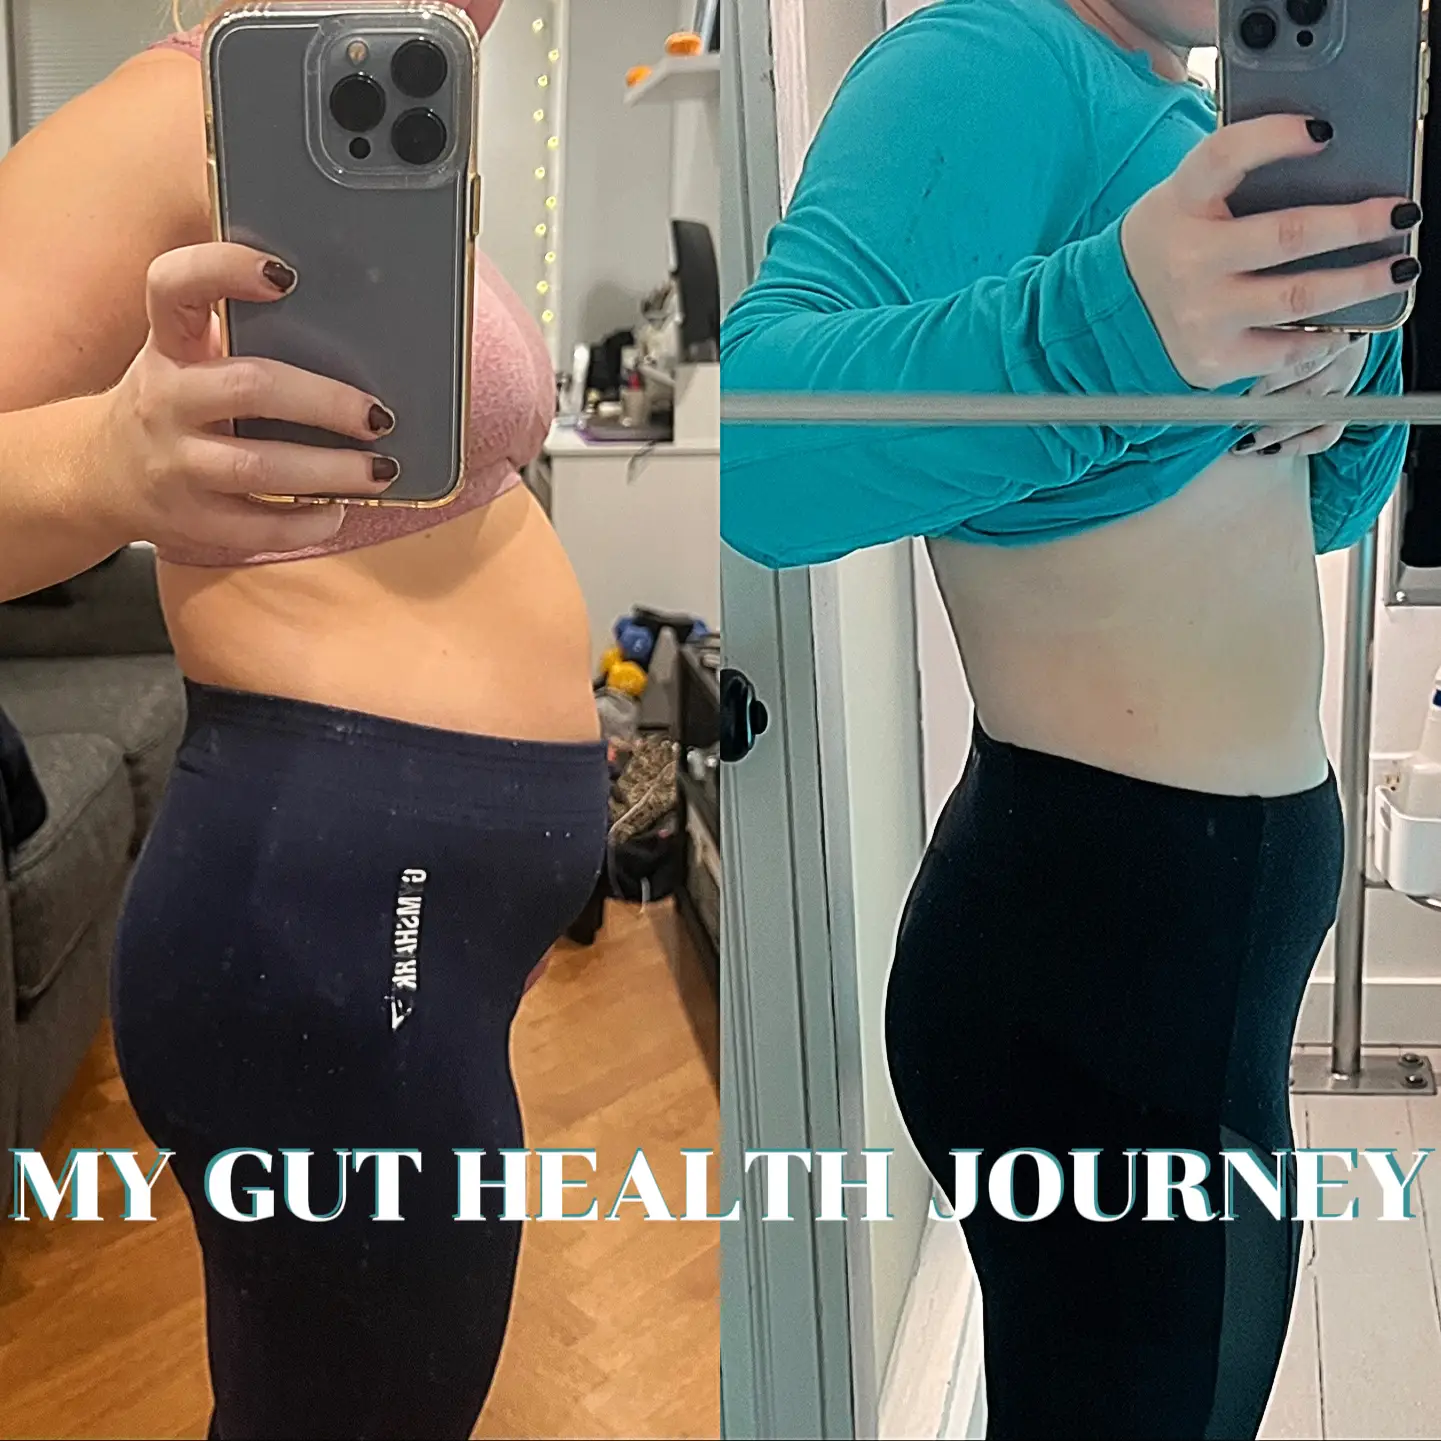 Follow me on my Gut Health Journey 😝, Gallery posted by Raven